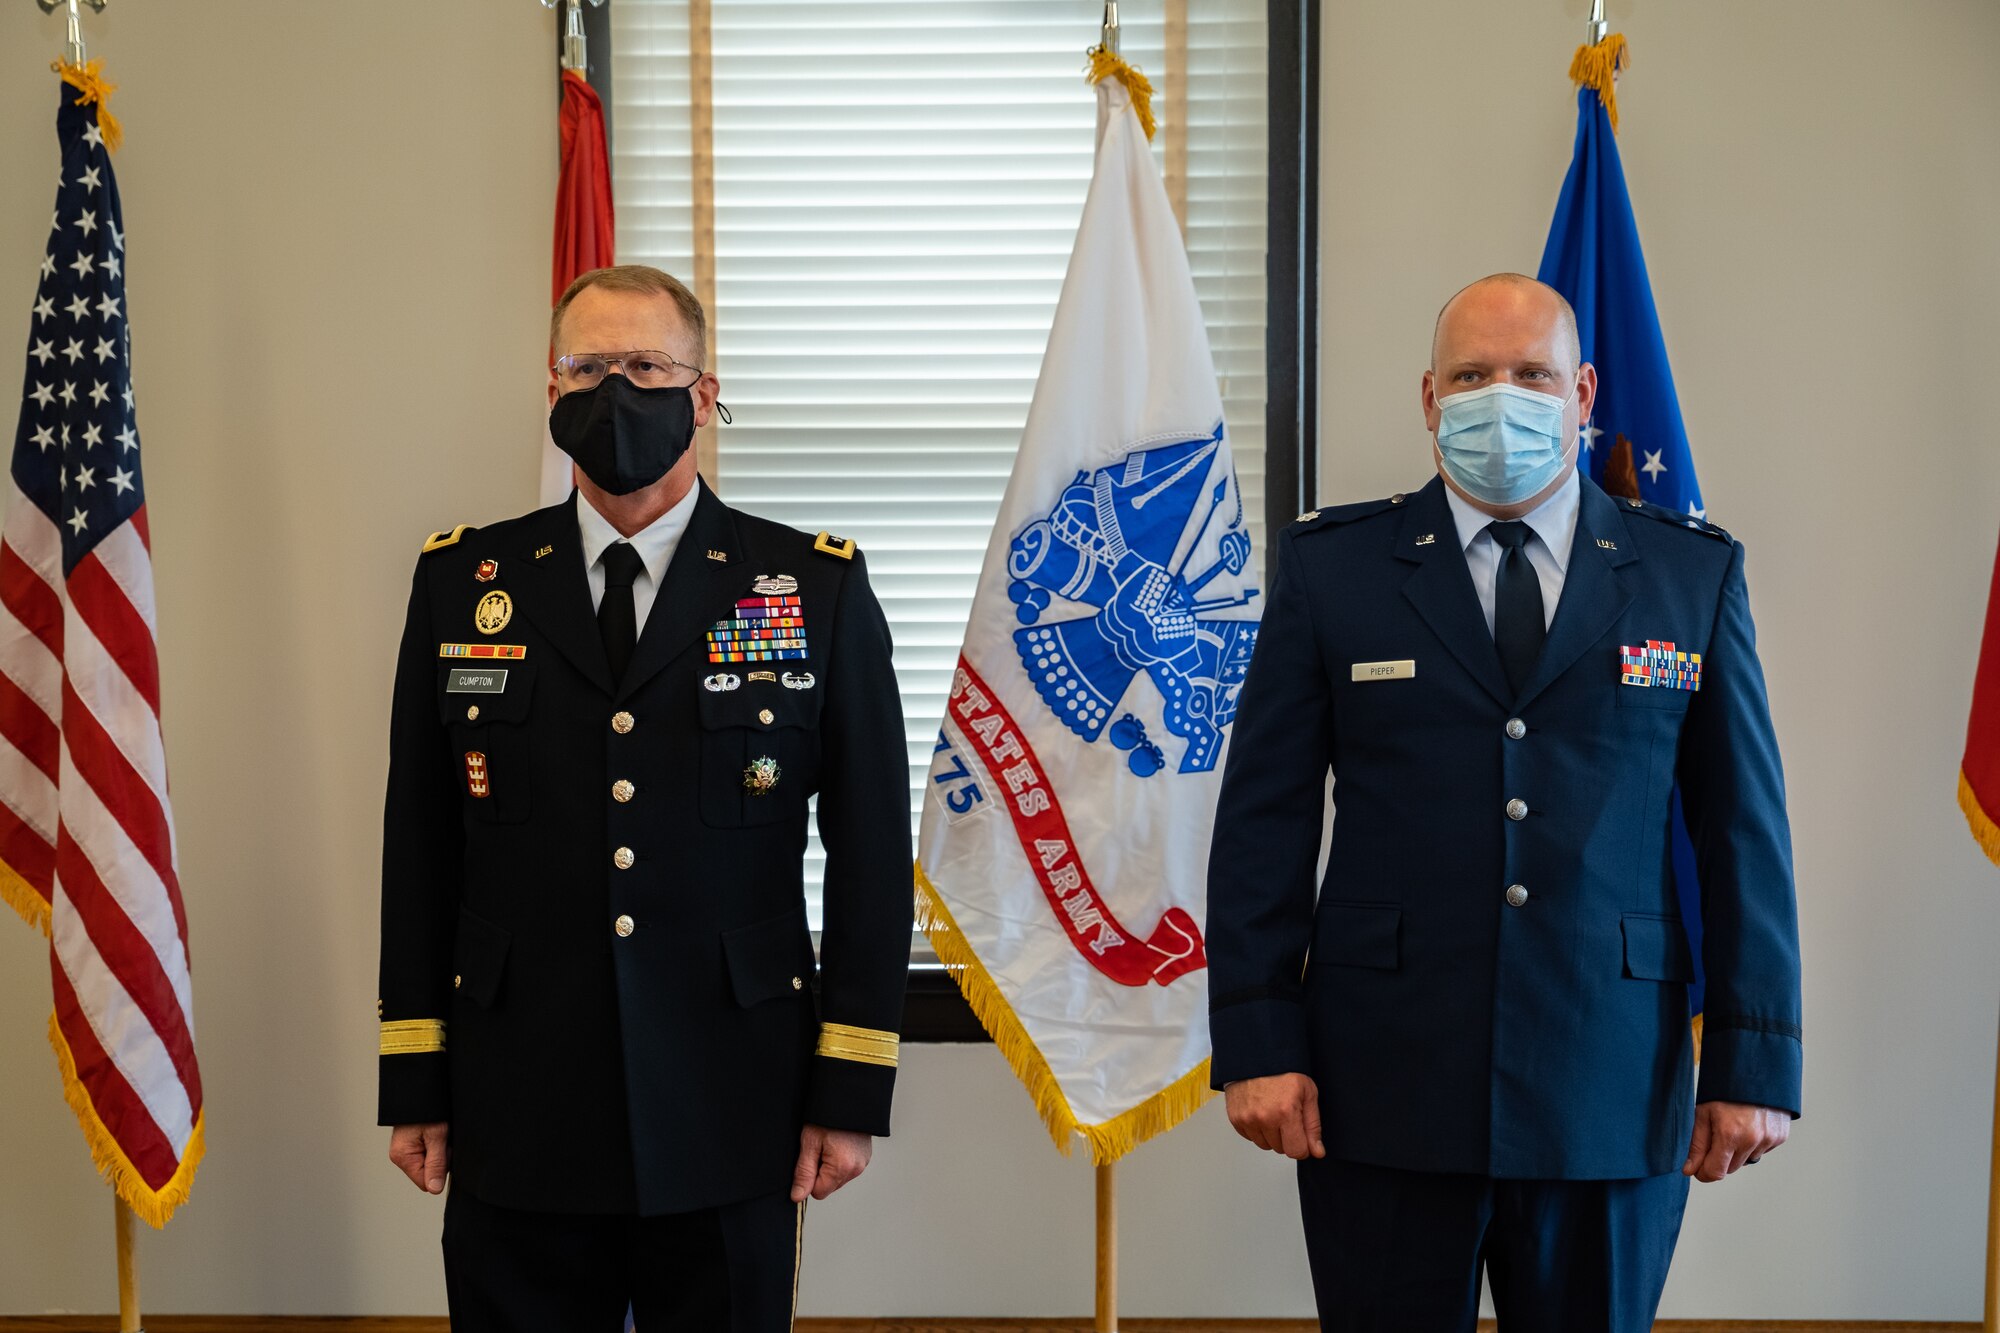 Adjutant General of the Missouri National Guard Maj. Gen. Levon Cumpton and Lt. Col. Matthew Pieper, a Center for Sustainment of Trauma and Readiness Skills instructor, stand at attention during a ceremony at Jefferson Barracks Air National Guard Base, Missouri, September 12, 2021. Pieper was presented with the Distinguished Flying Cross for his lifesaving actions during a 2018 aeromedical evacuation flight while deployed to Afghanistan. (U.S. Air National Guard photo by Master Sgt. Stephen Froeber)